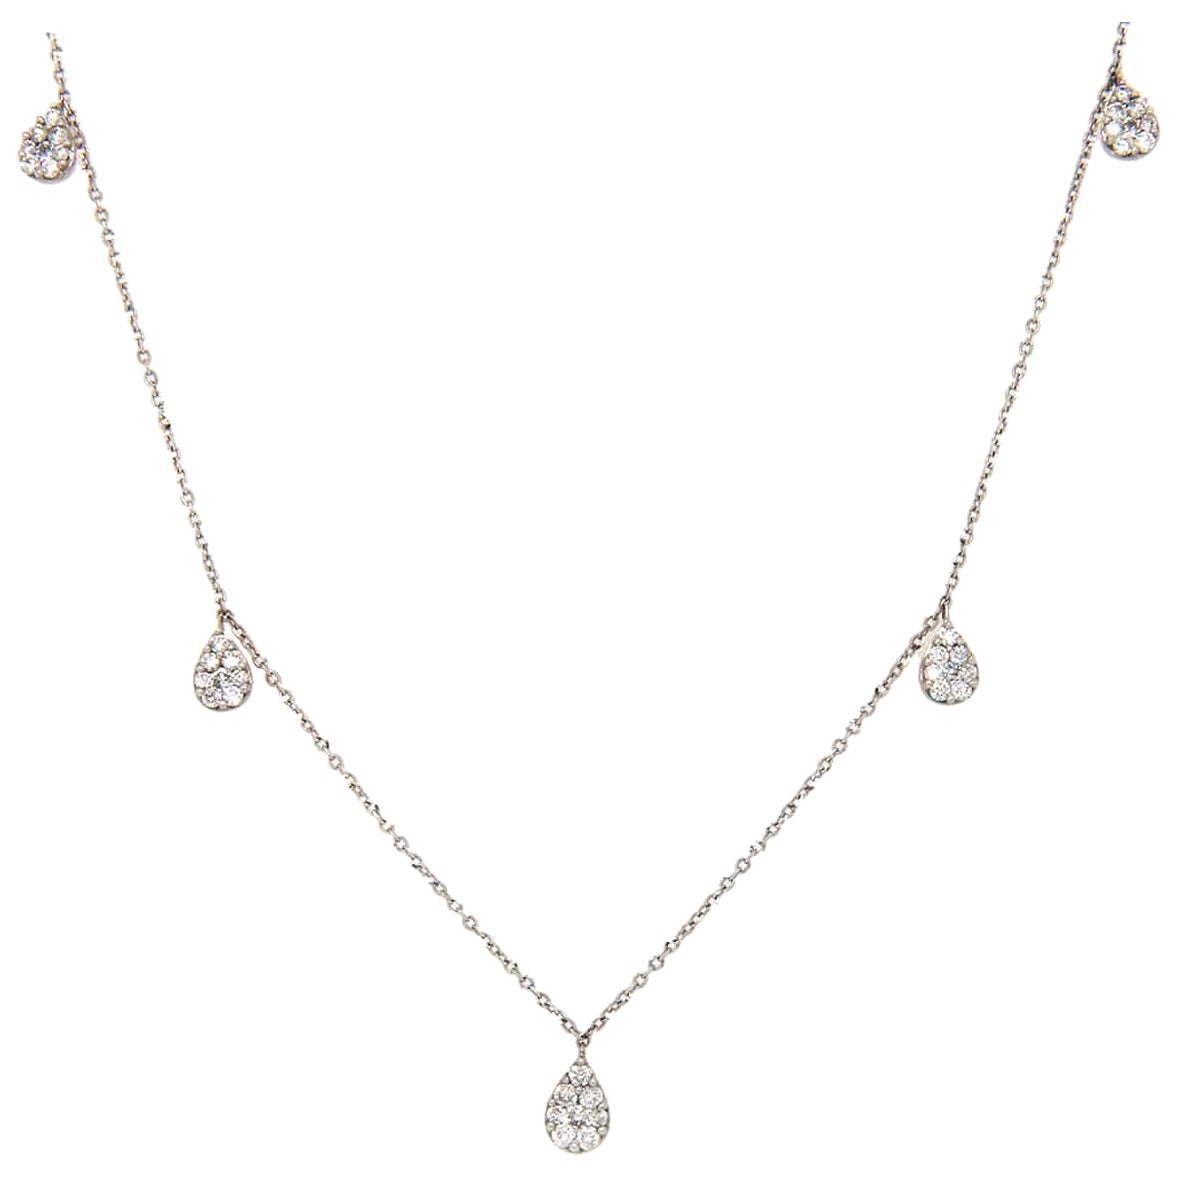 0.48ctw Diamond Station Drop Necklace in 14K White Gold